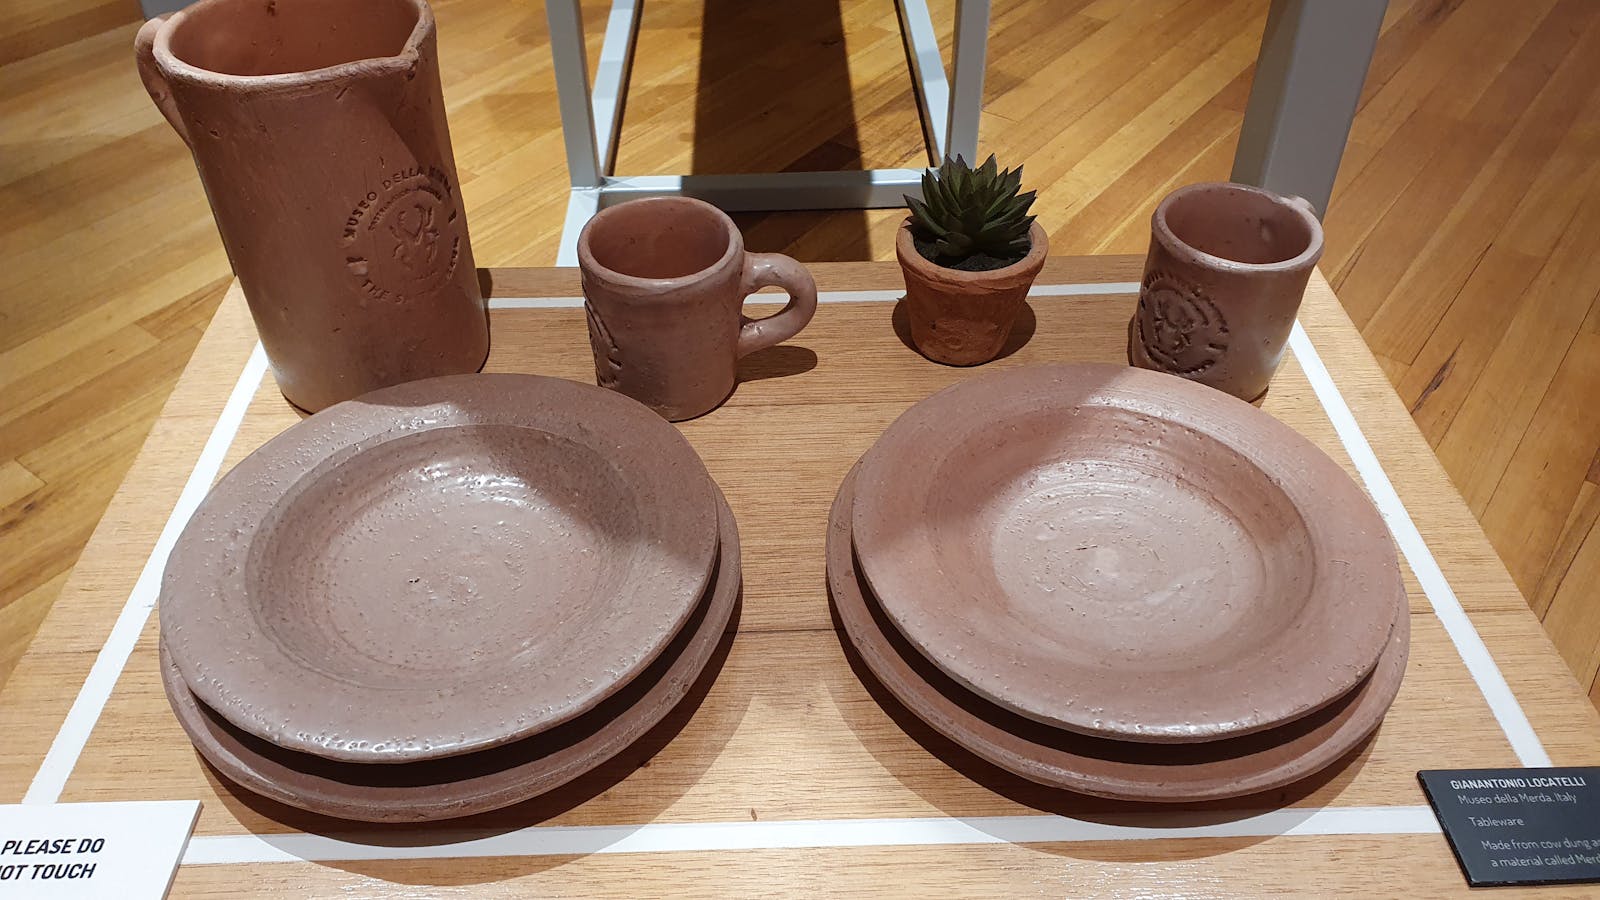 Tableware made with cow dung